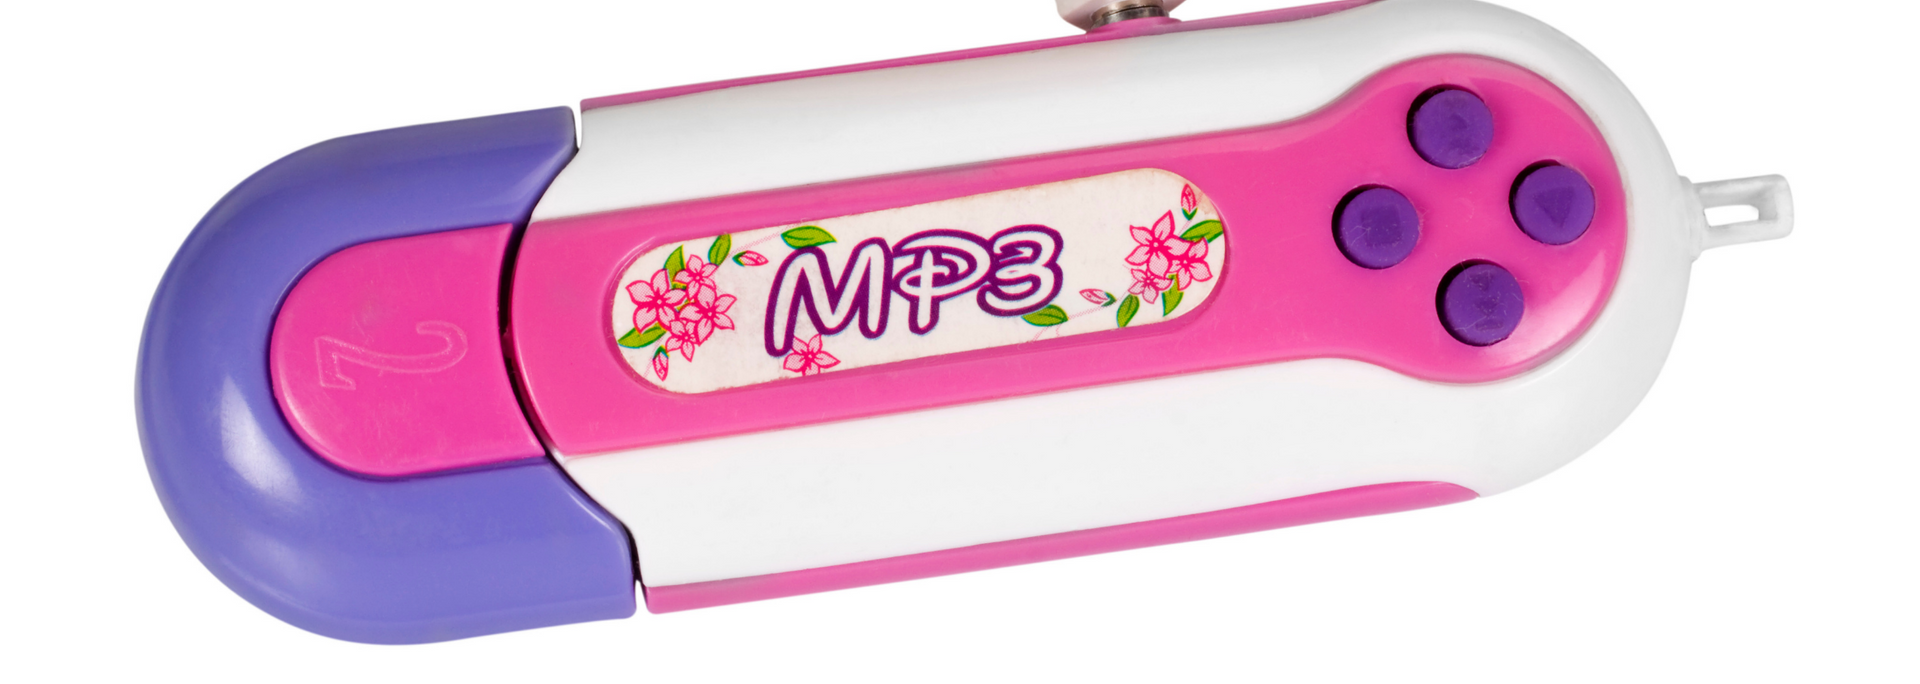 Picture of an MP3 player designed for children